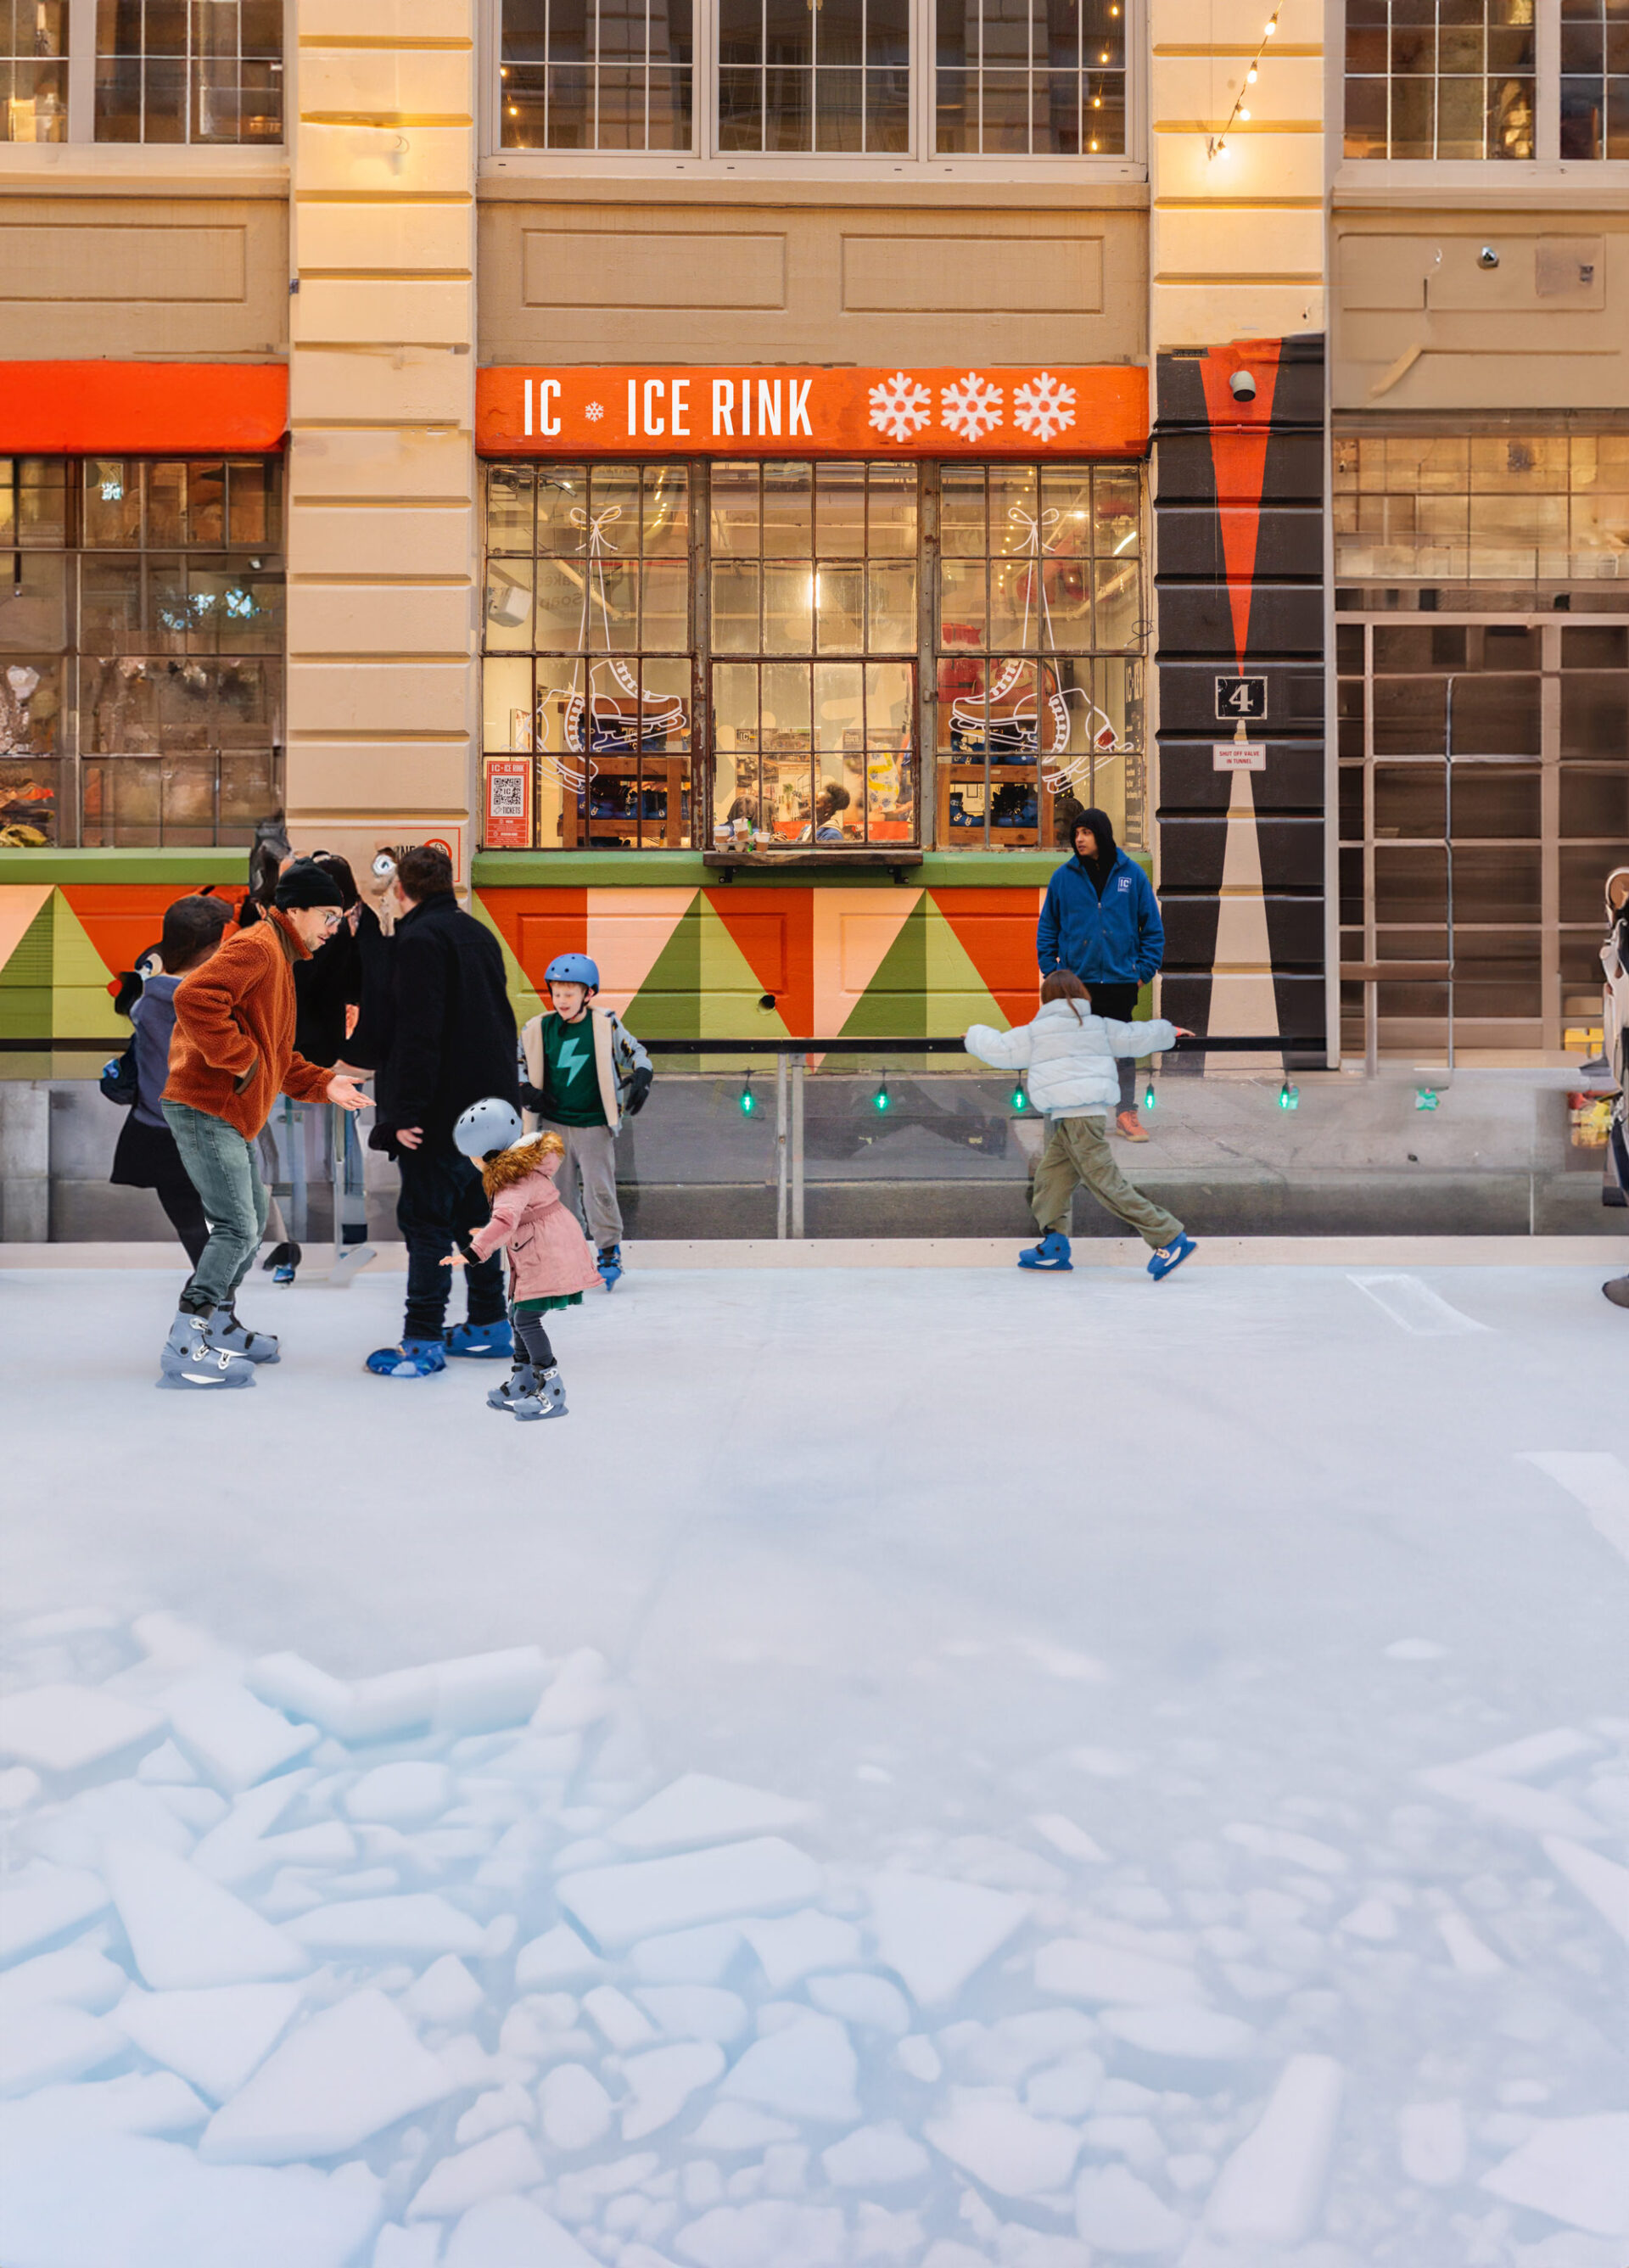 People are ice skating on an ice skating rink.